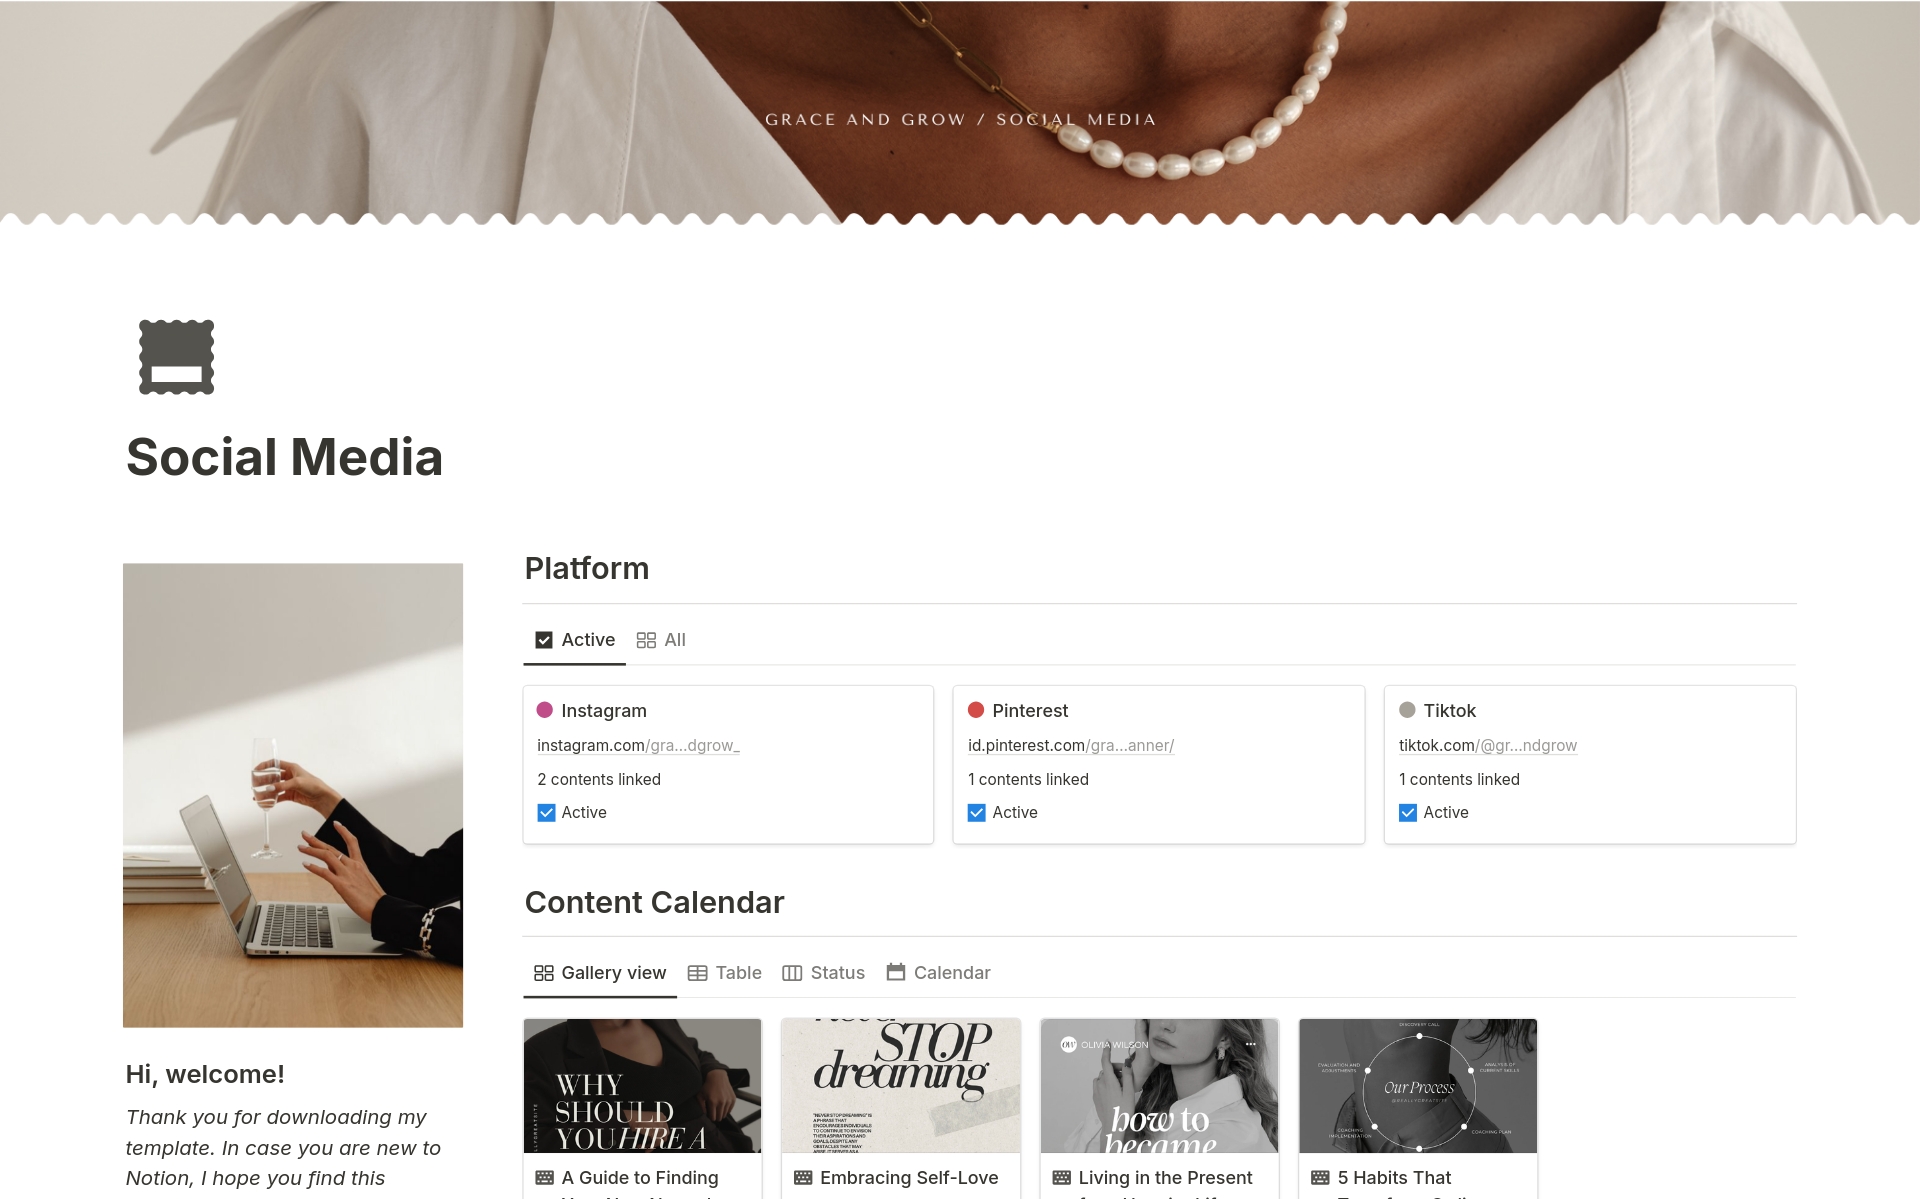 This Notion Social Media Template is designed to streamline your social media management process, making it easier to plan, schedule, and analyze your content across multiple platforms. 